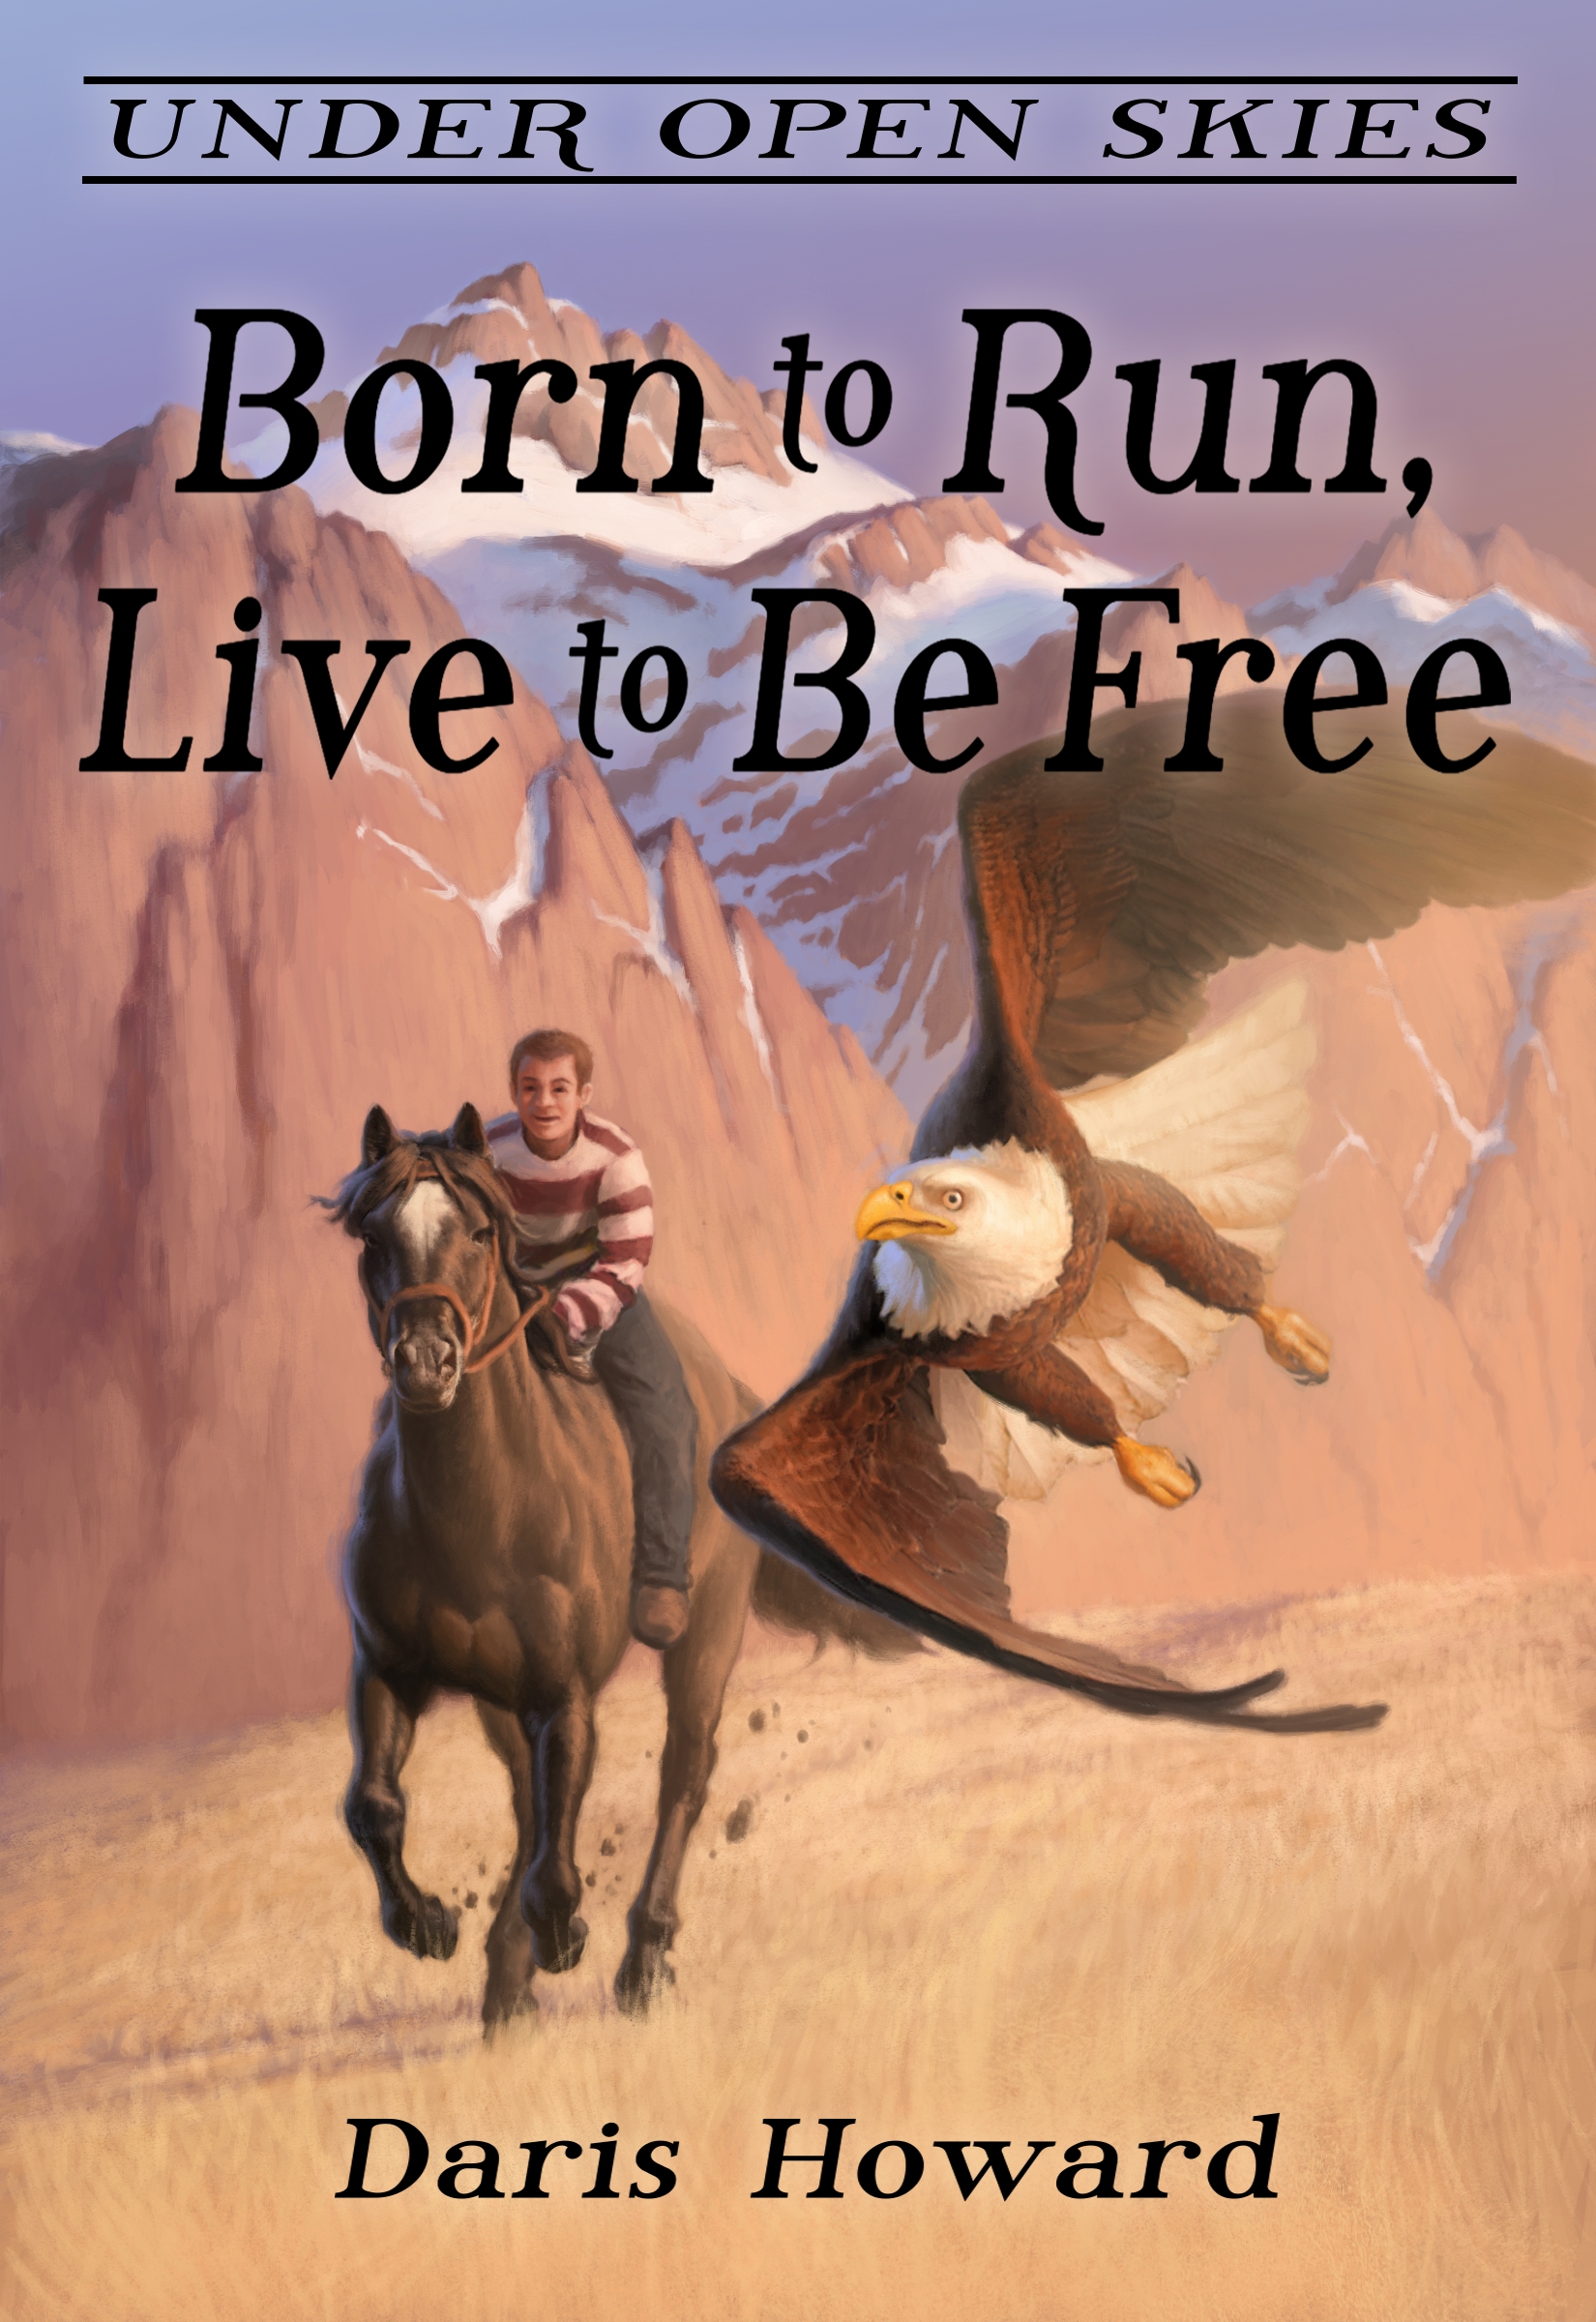 FREE: Born to Run, Live to be Free by Daris Howard